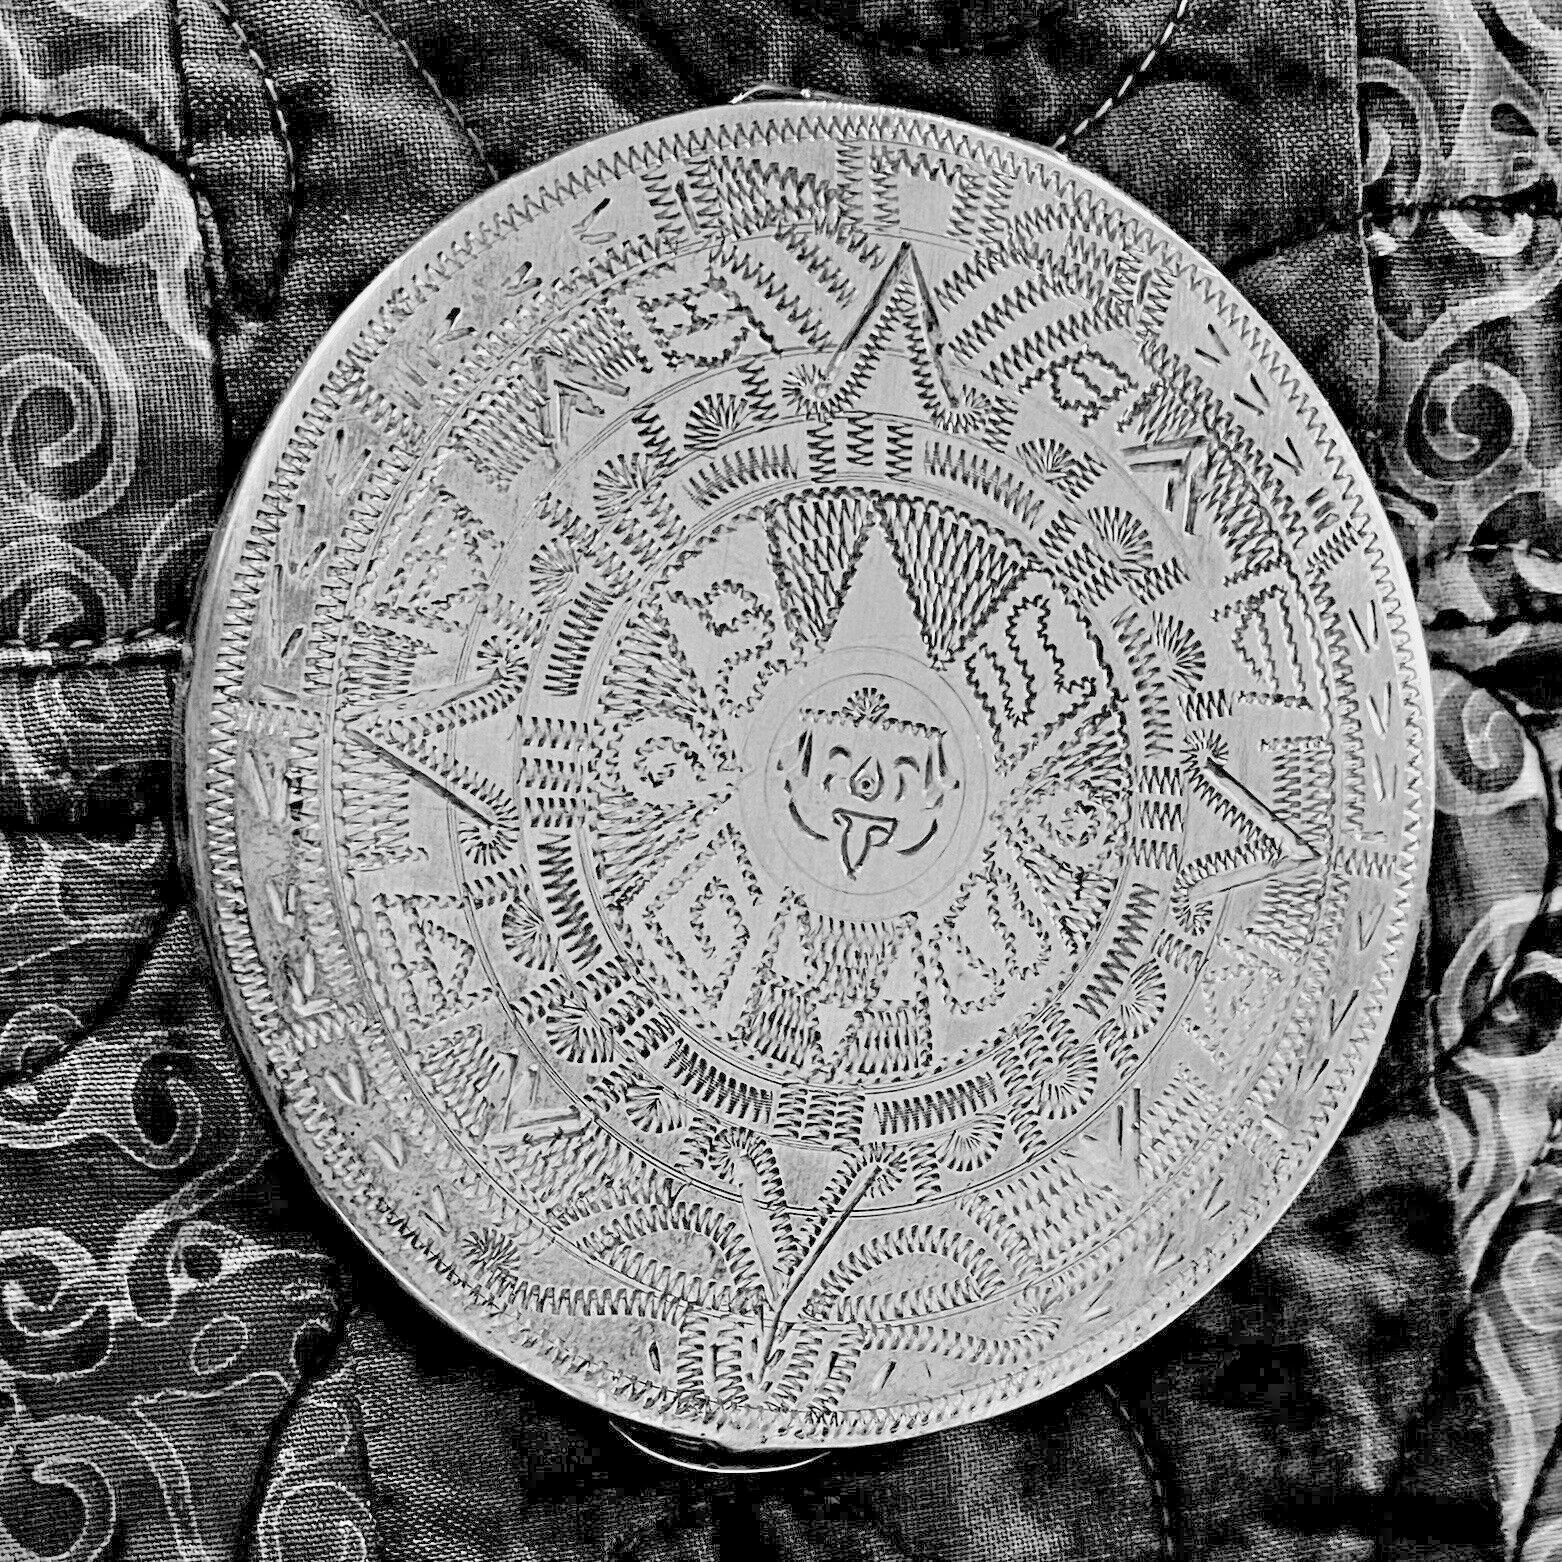 Vintage Mexican Sterling Silver Compact